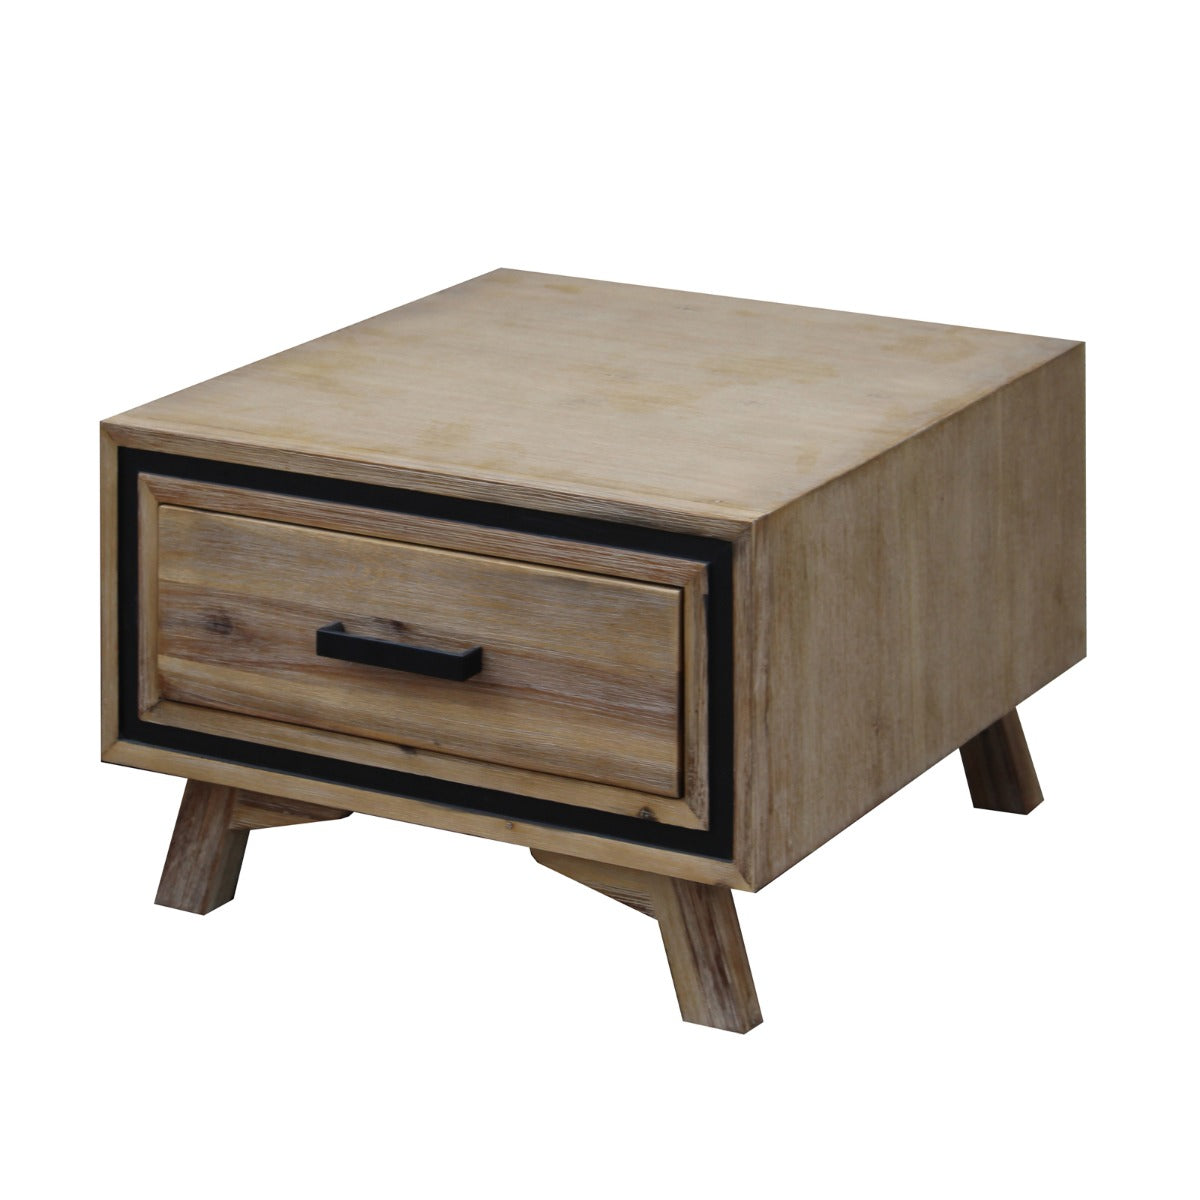 Lamp Table with 1 Storage Drawer Solid Wooden Frame in Silver Brush Colour - image2